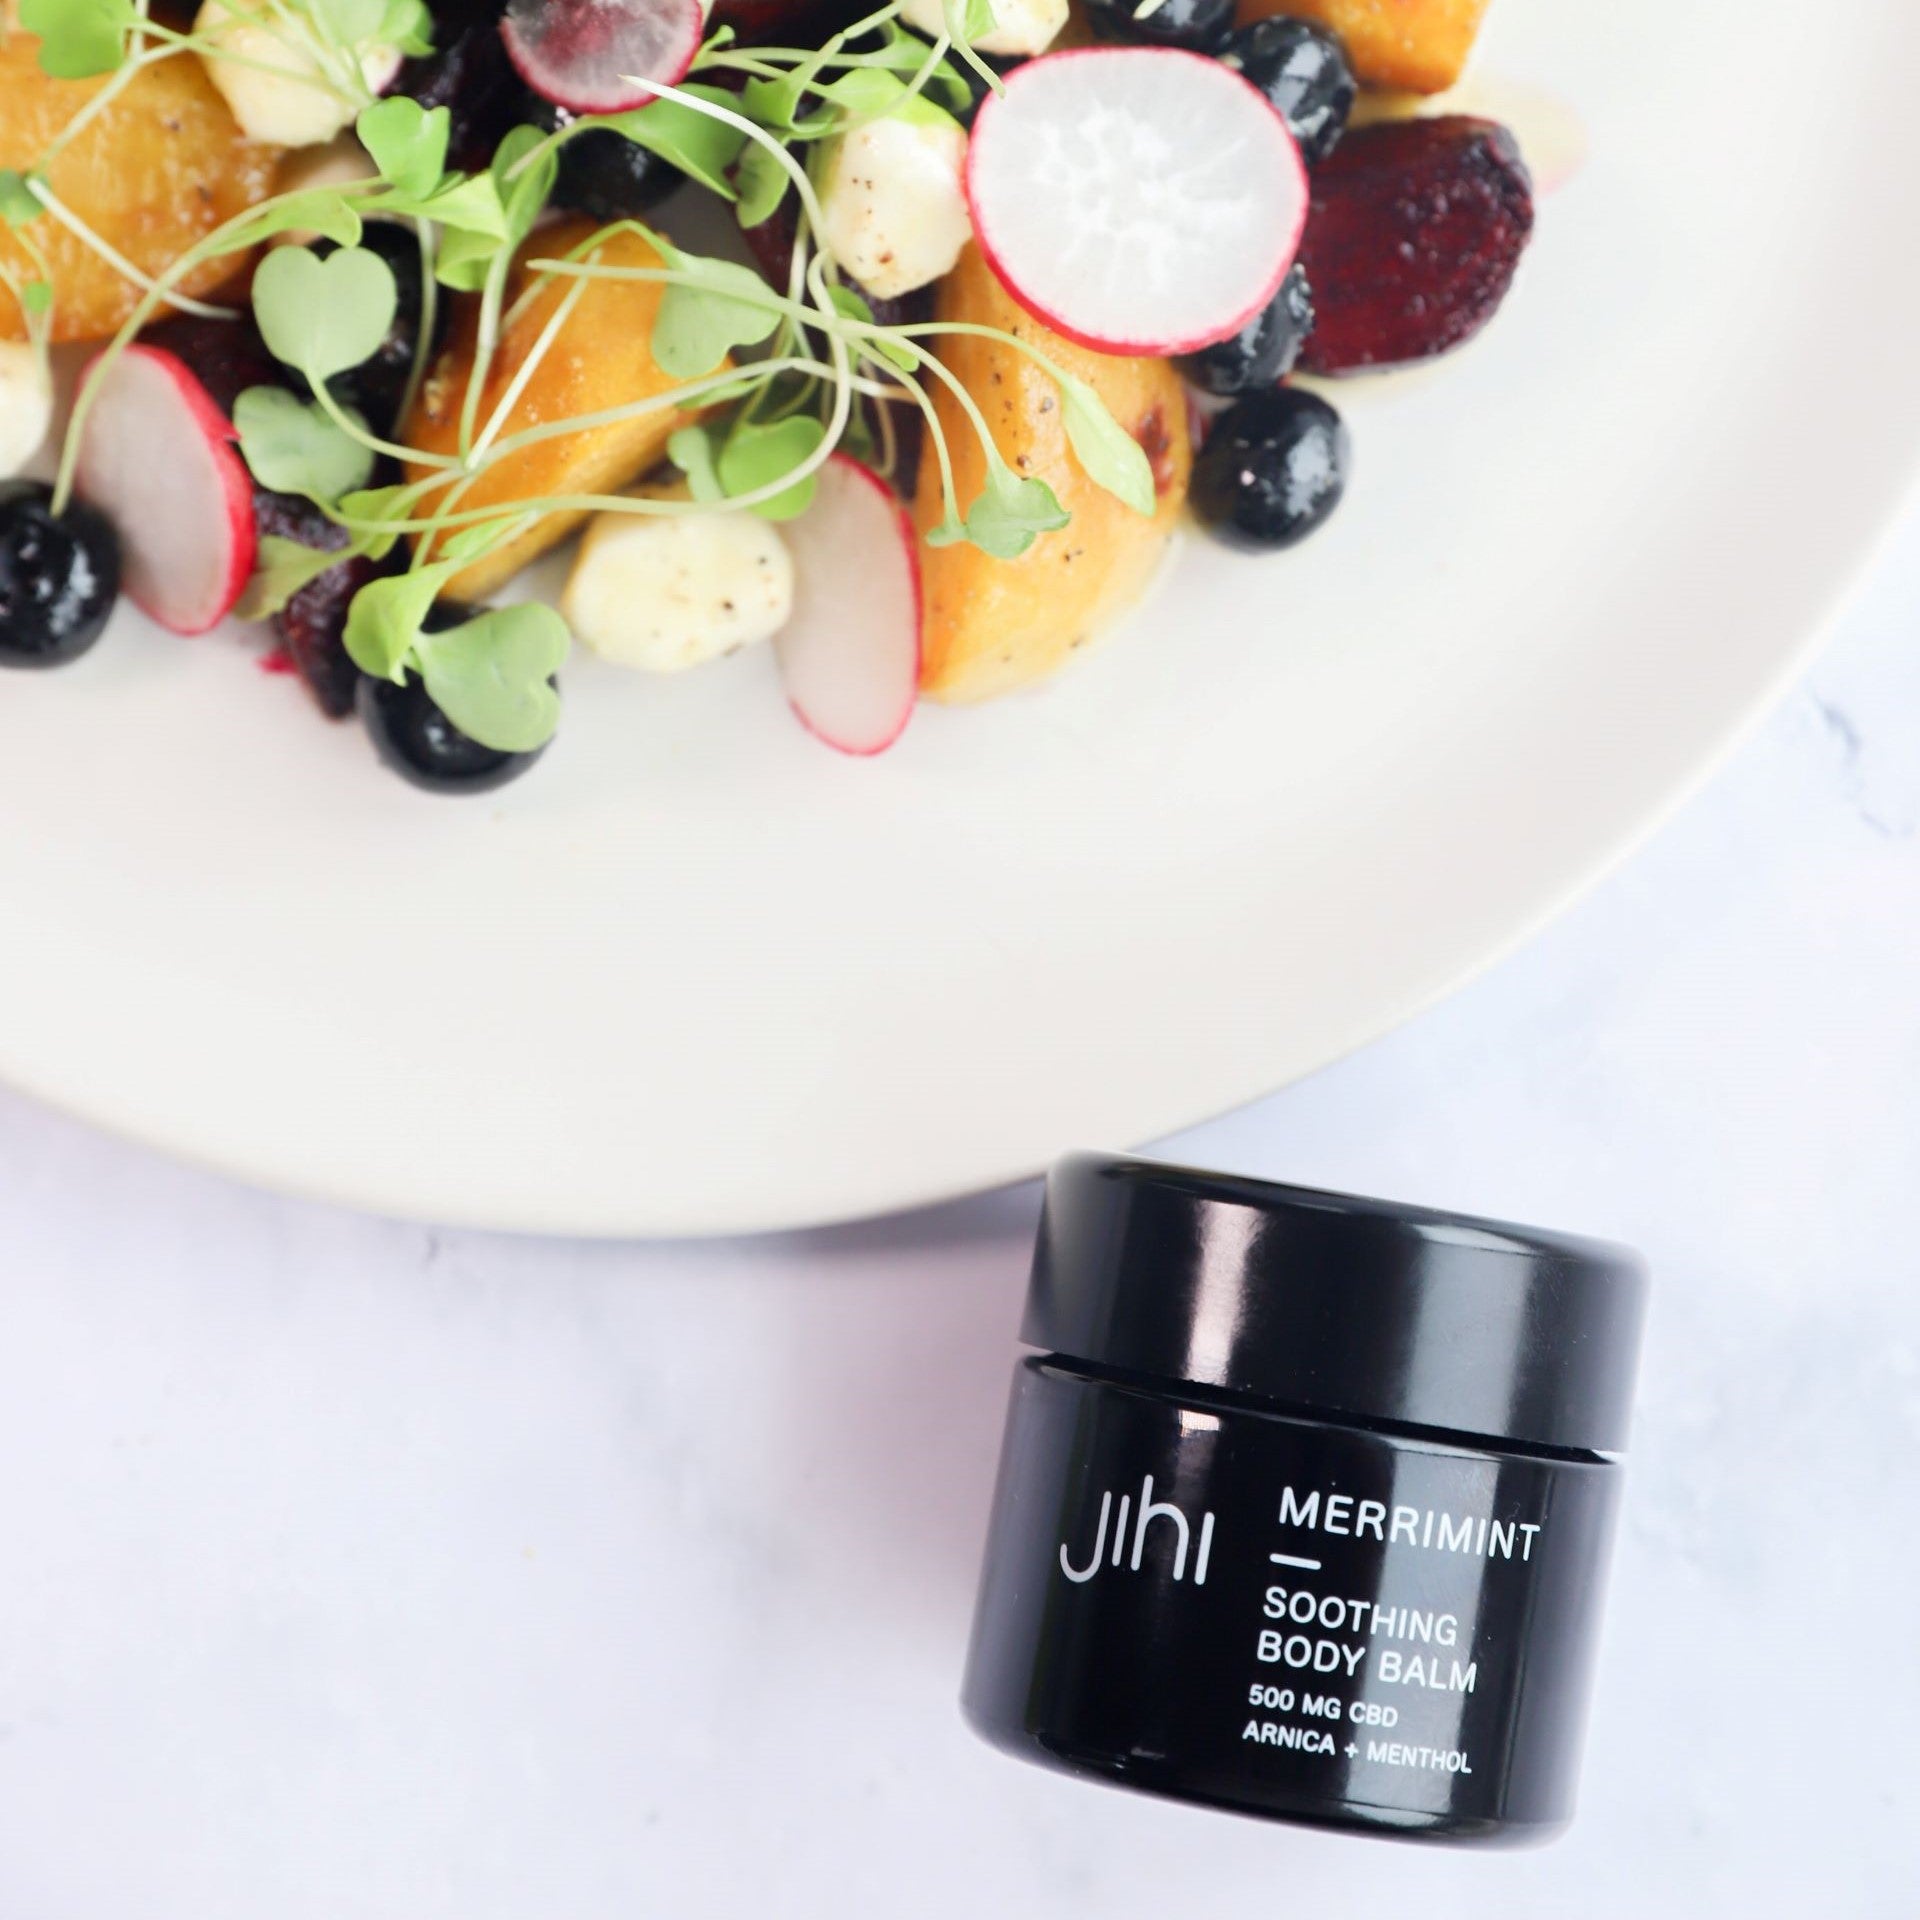 Blueberry Beet Salad with Jihi Merrimint Soothing Body Balm